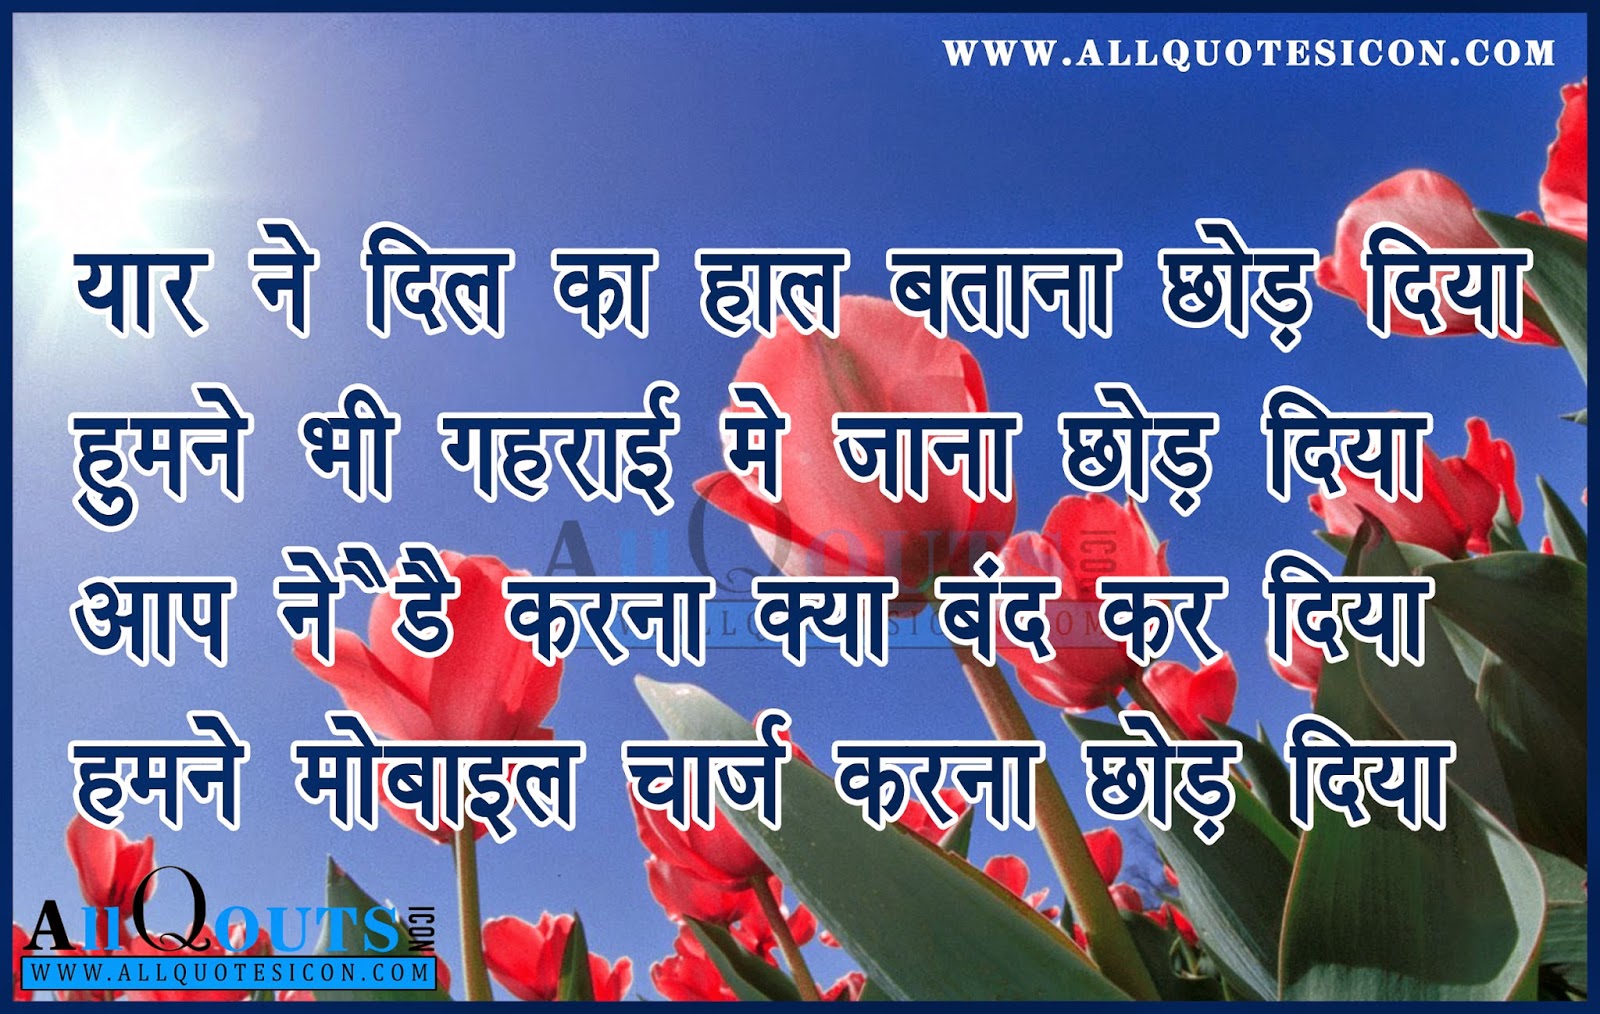 Hindi quotes images thoughts Love Friendship inspiration motivation